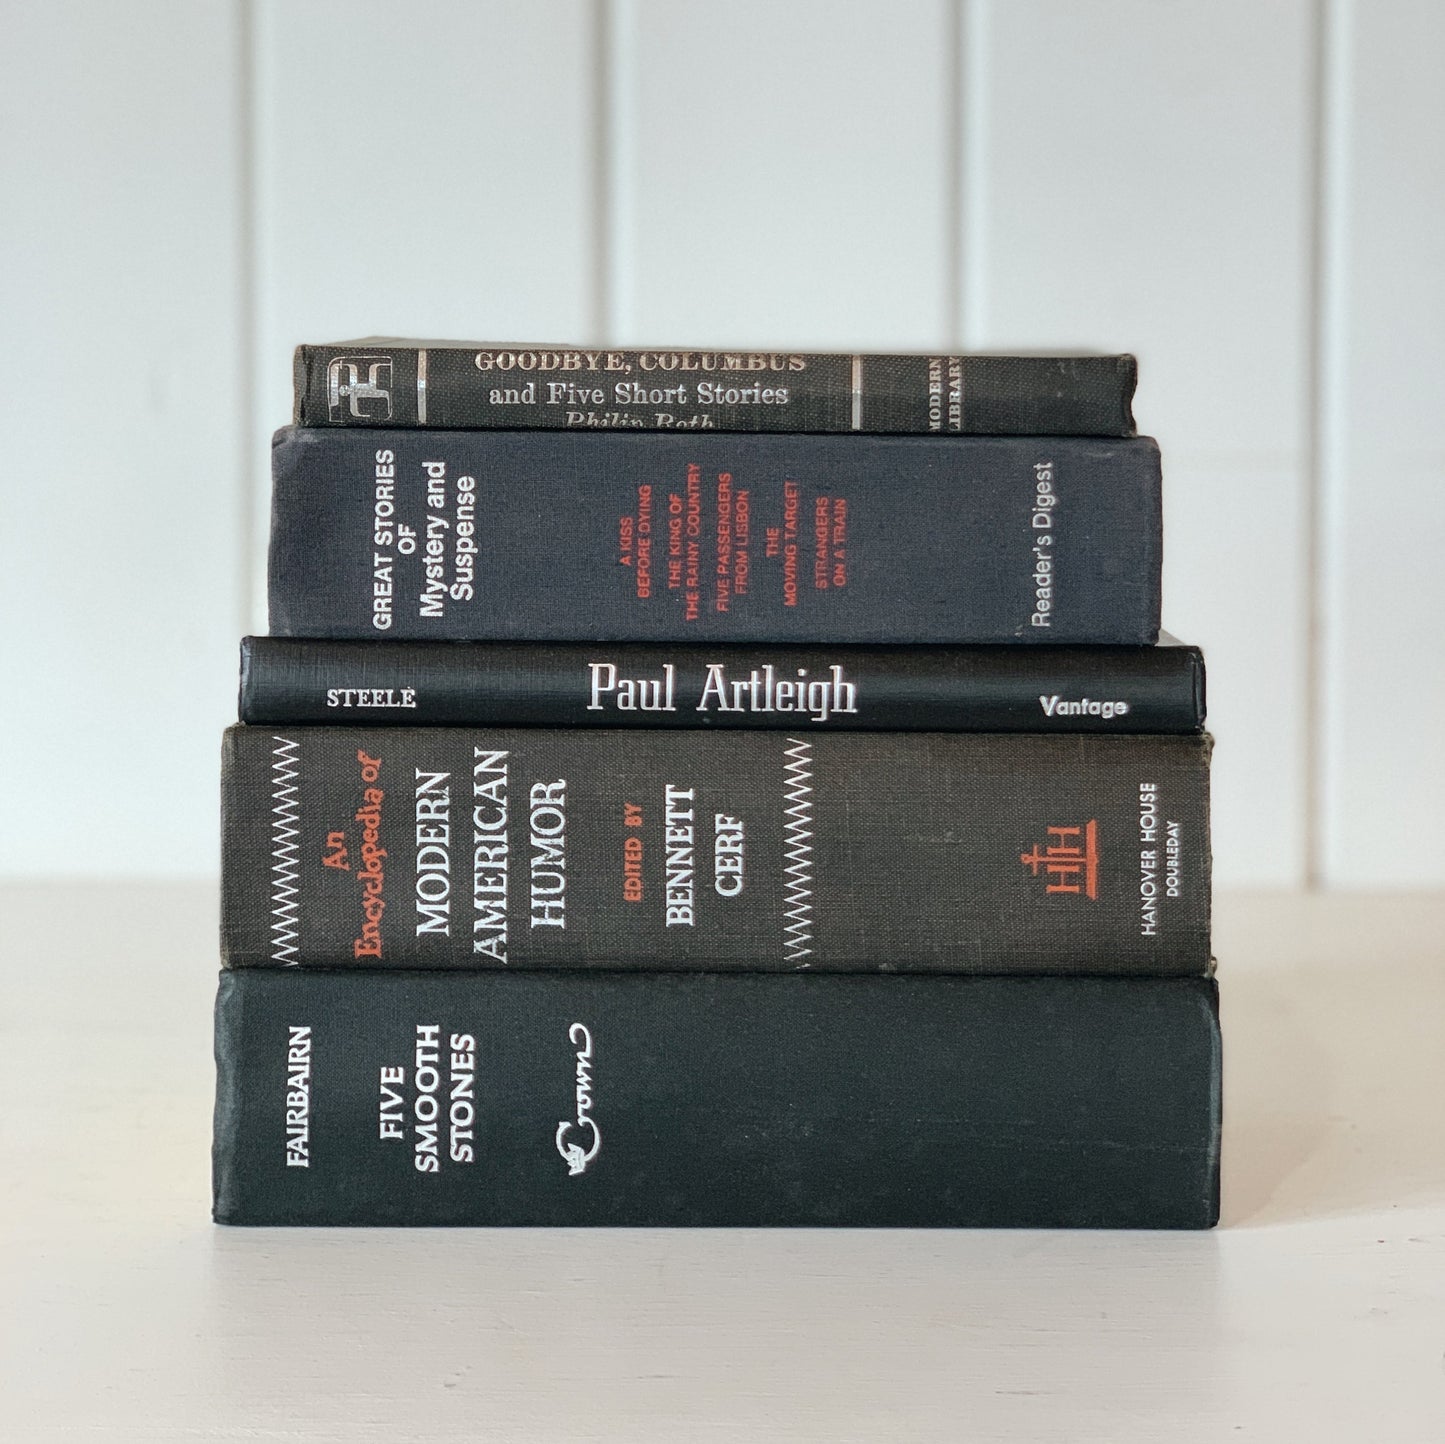 Black Silver and Red Vintage Books, Books By Color For Bookshelf Decor, Masculine Office Shelf Styling